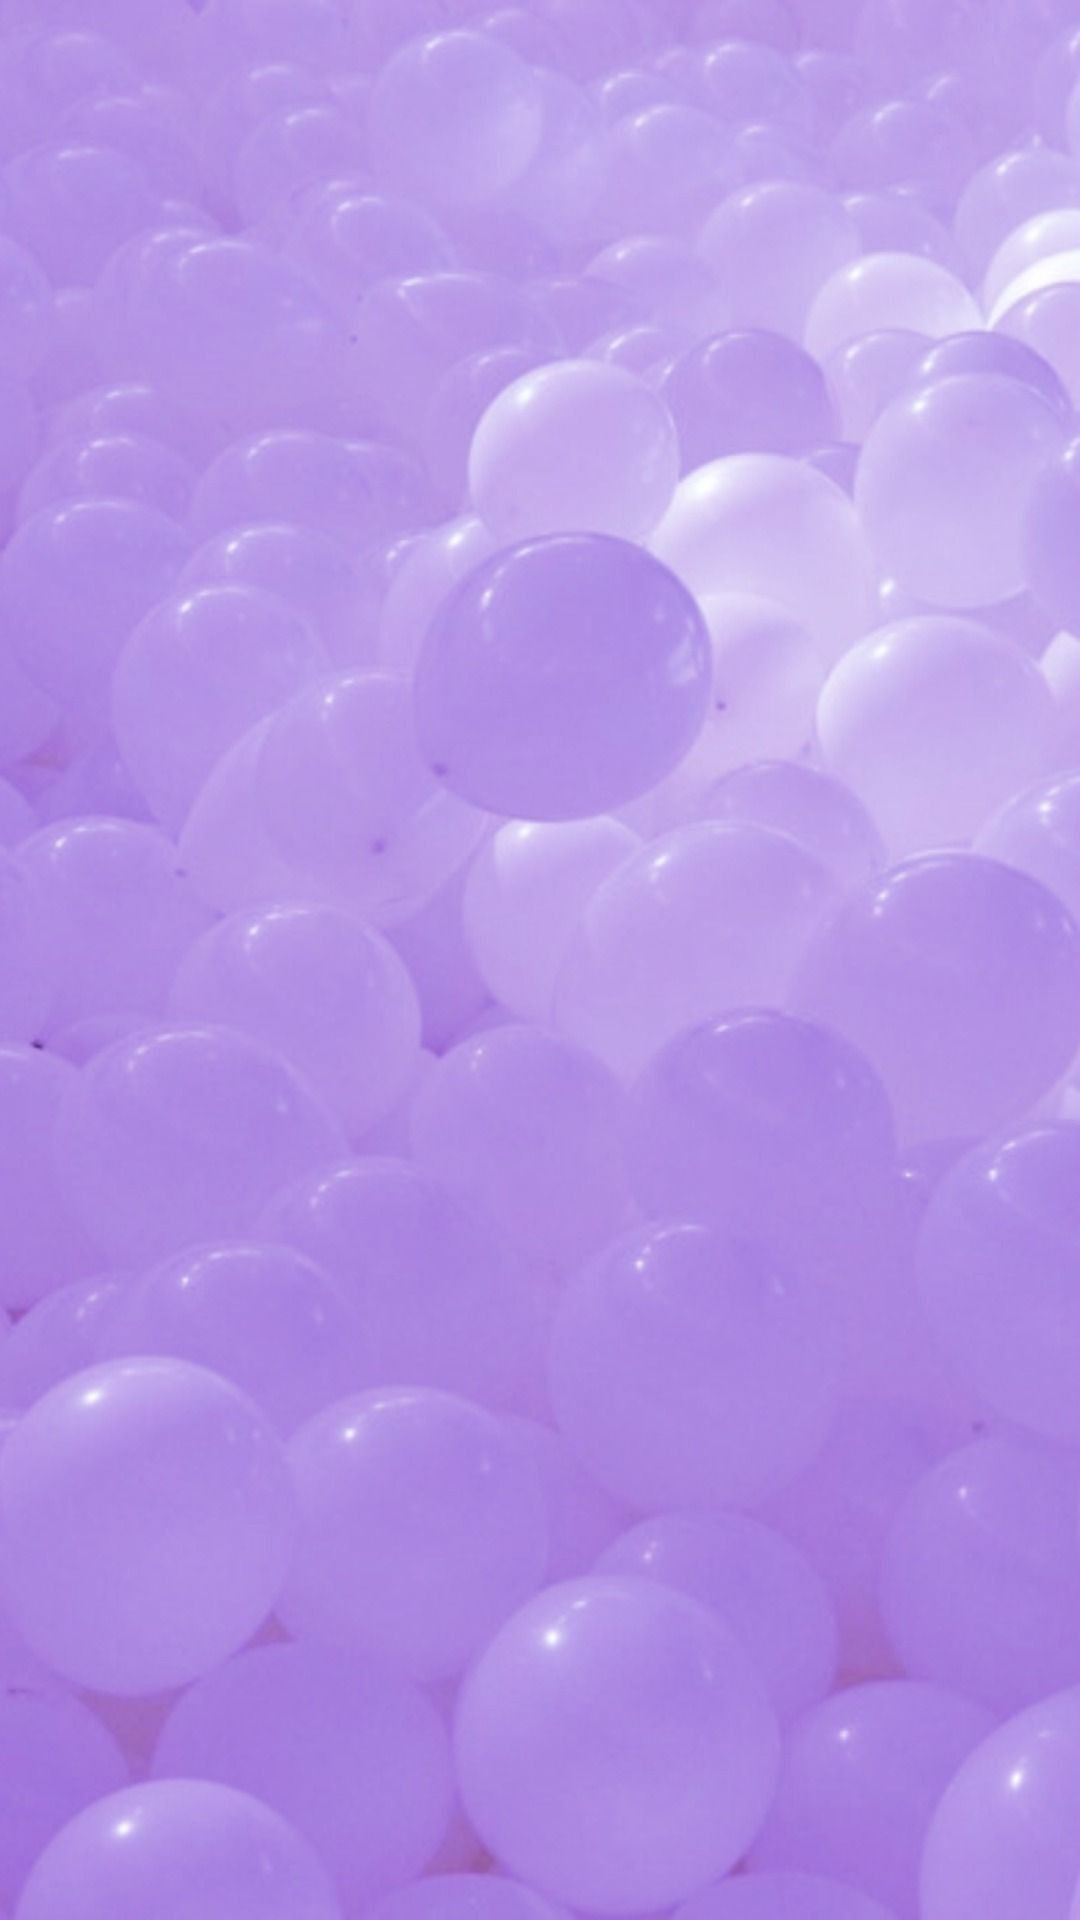 A close up of some purple balloons - Lavender